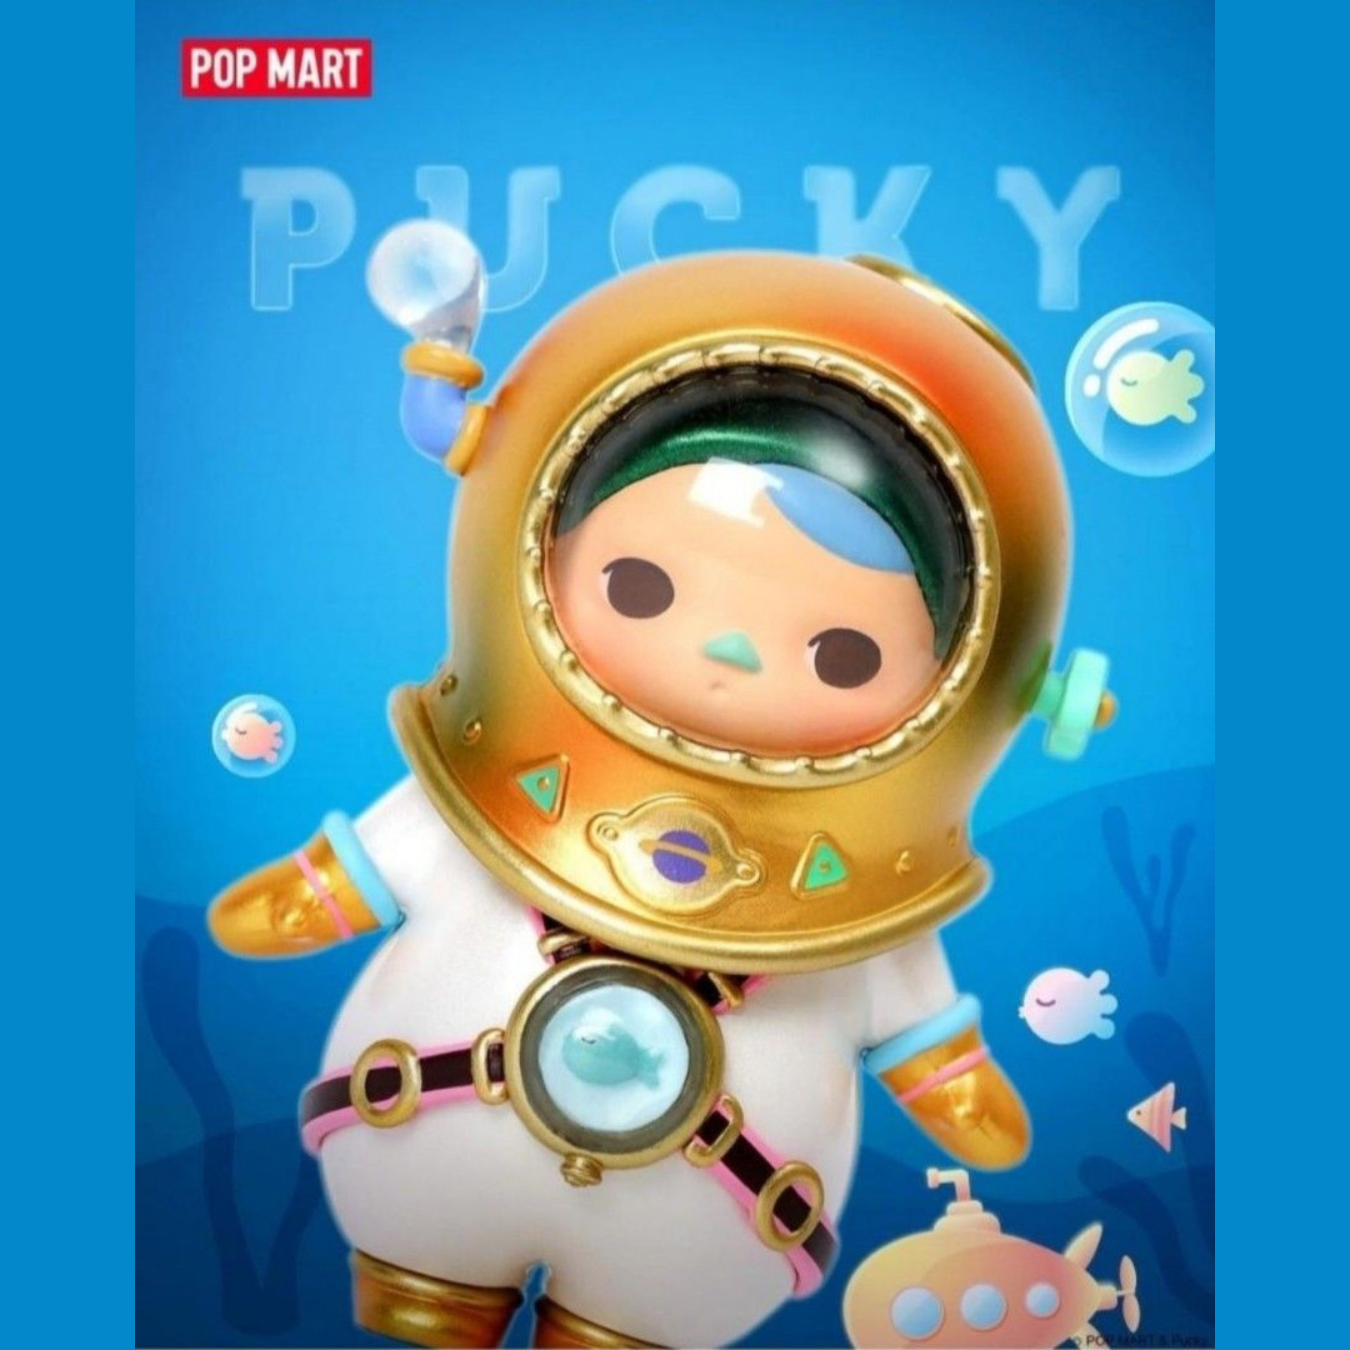 【Limited】Pucky Planet Explorer Deep Sea Explorer Baby Blister Package